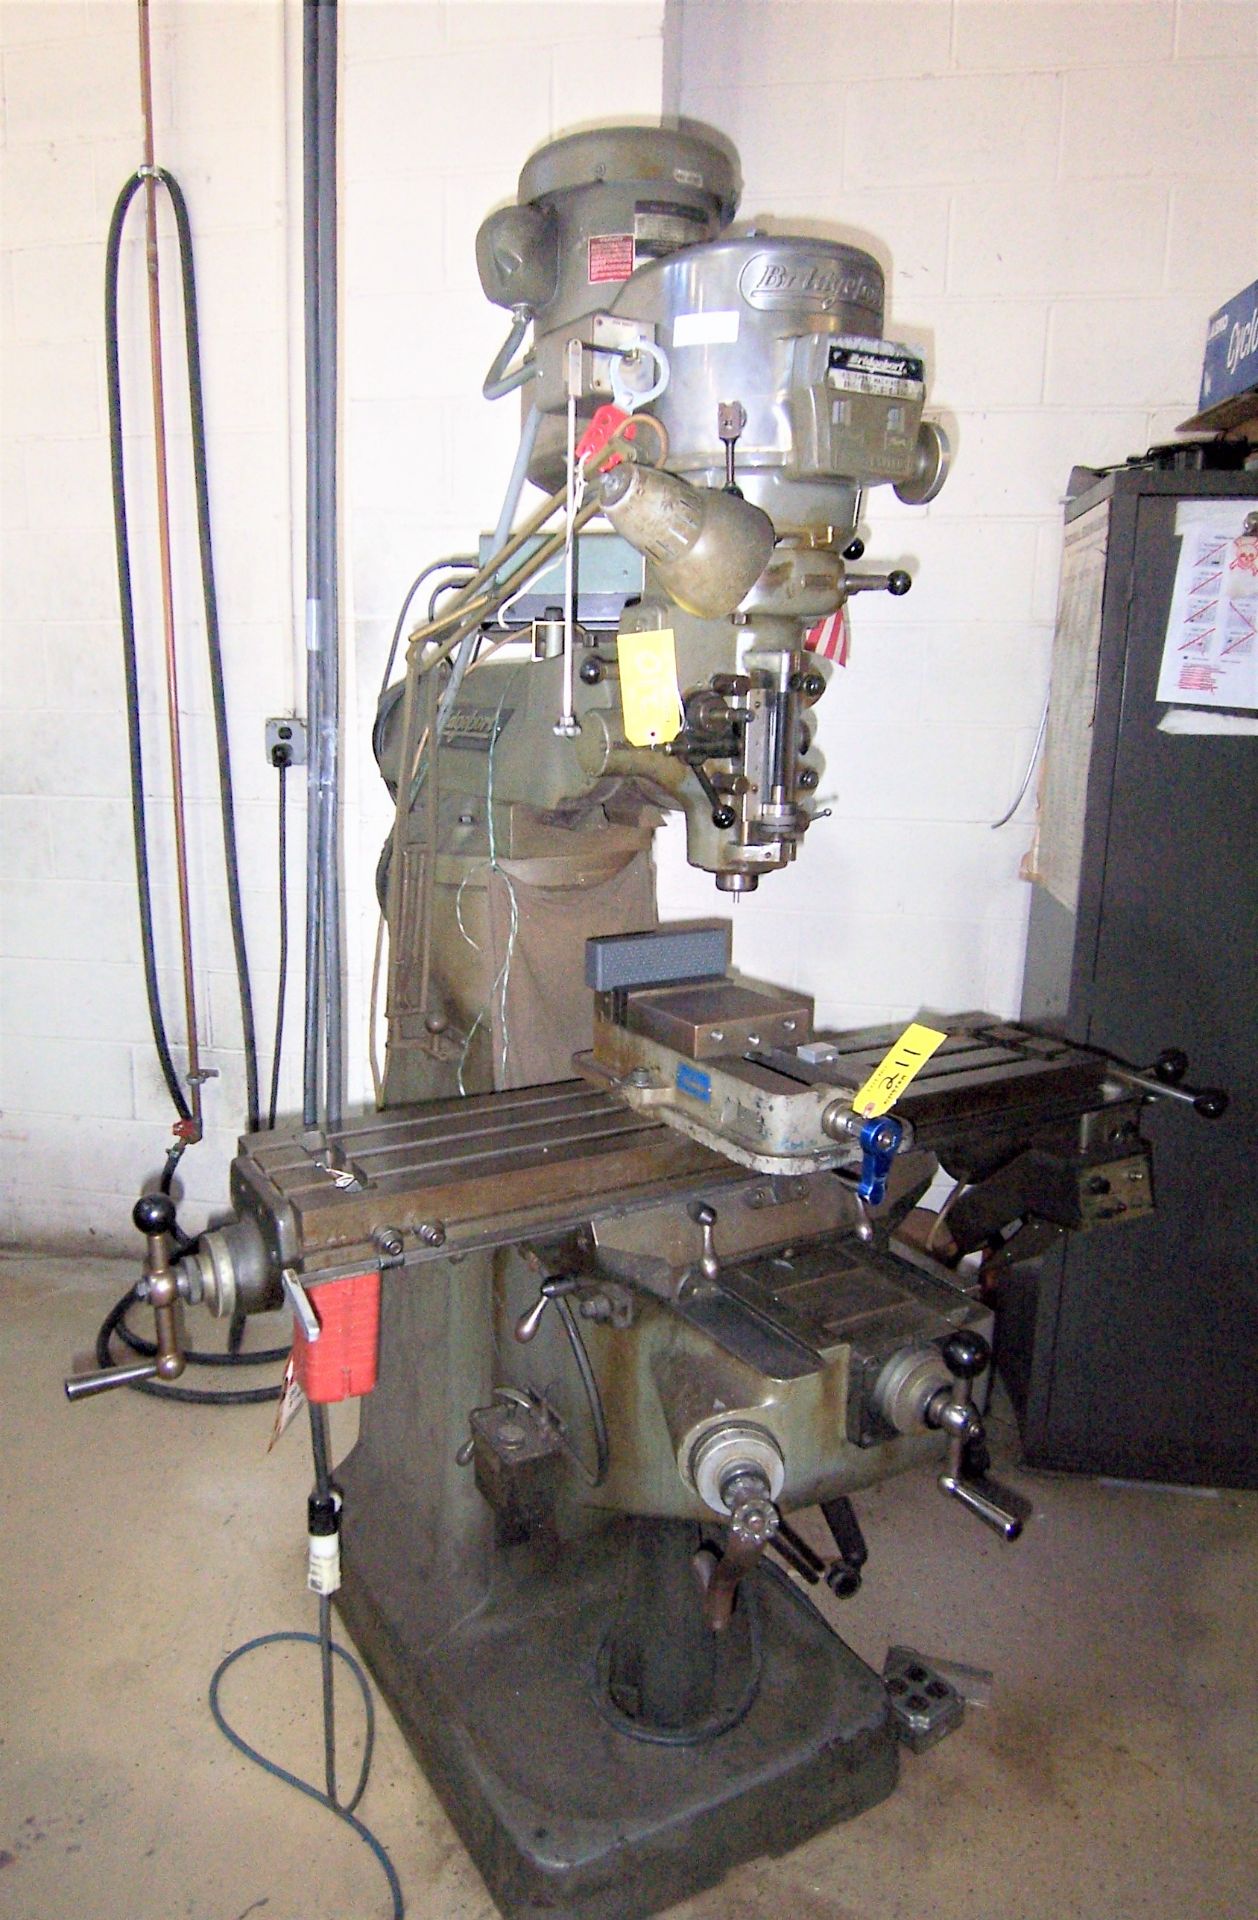 BRIDGEPORT SERIES I 2HP VERTICAL MILLING MACHINE, WITH 9" X 42" POWER FEED TABLE, SPINDLE SPEEDS